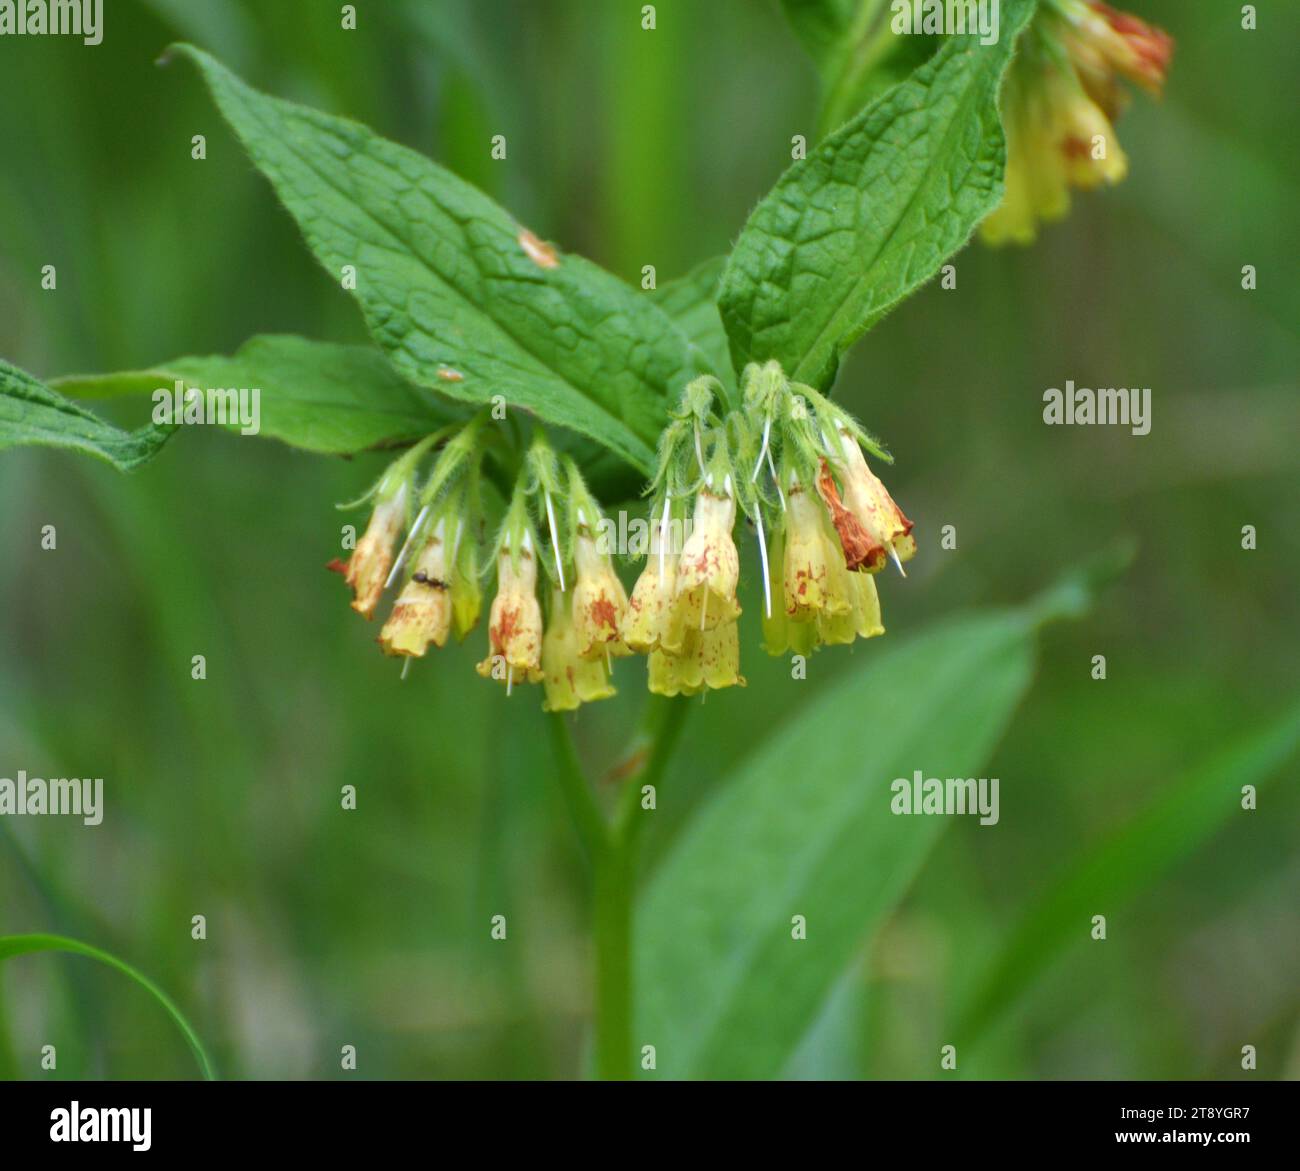 Yellow comfrey small cupped (Symphytum microcalyx) blooms in the forest among wild grasses Stock Photo